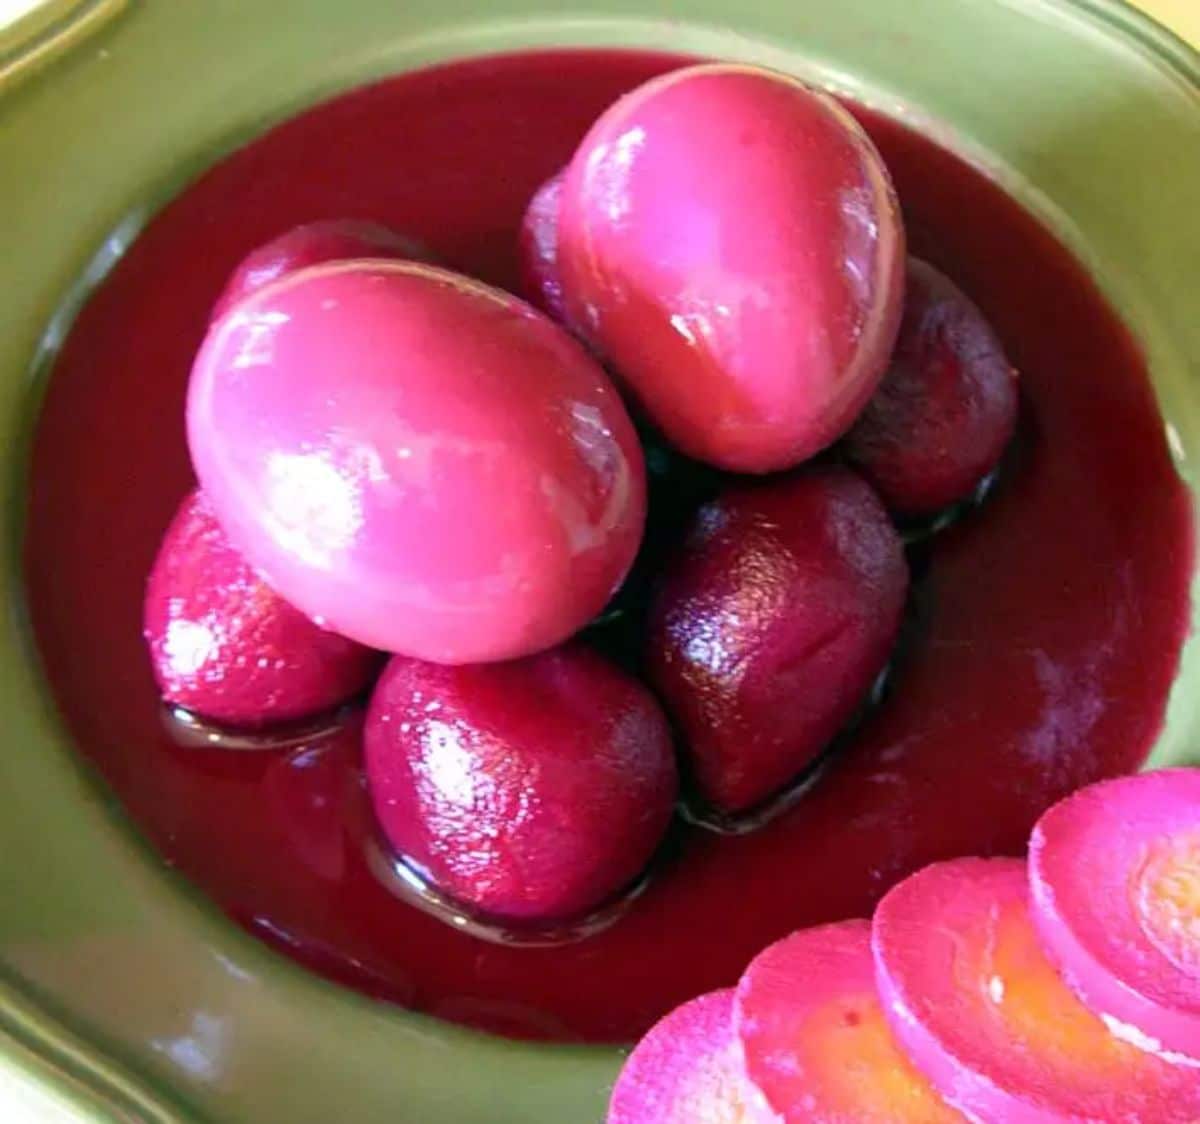 Pickled eggs and red beets on a green plate.